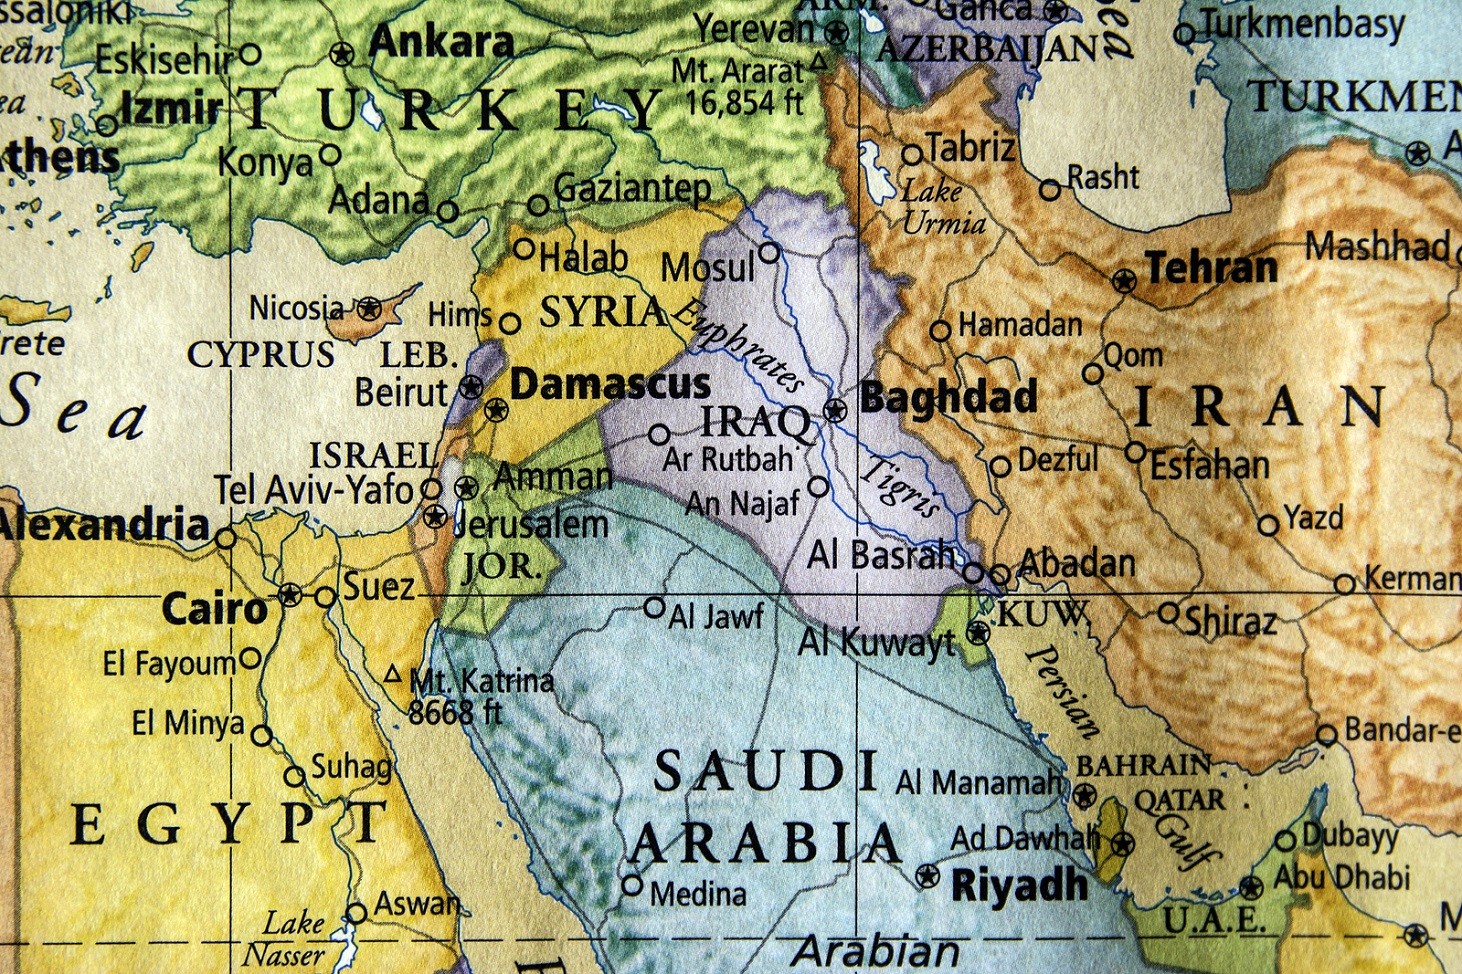 colored map of Syria, Iraq, and surrounding middle east